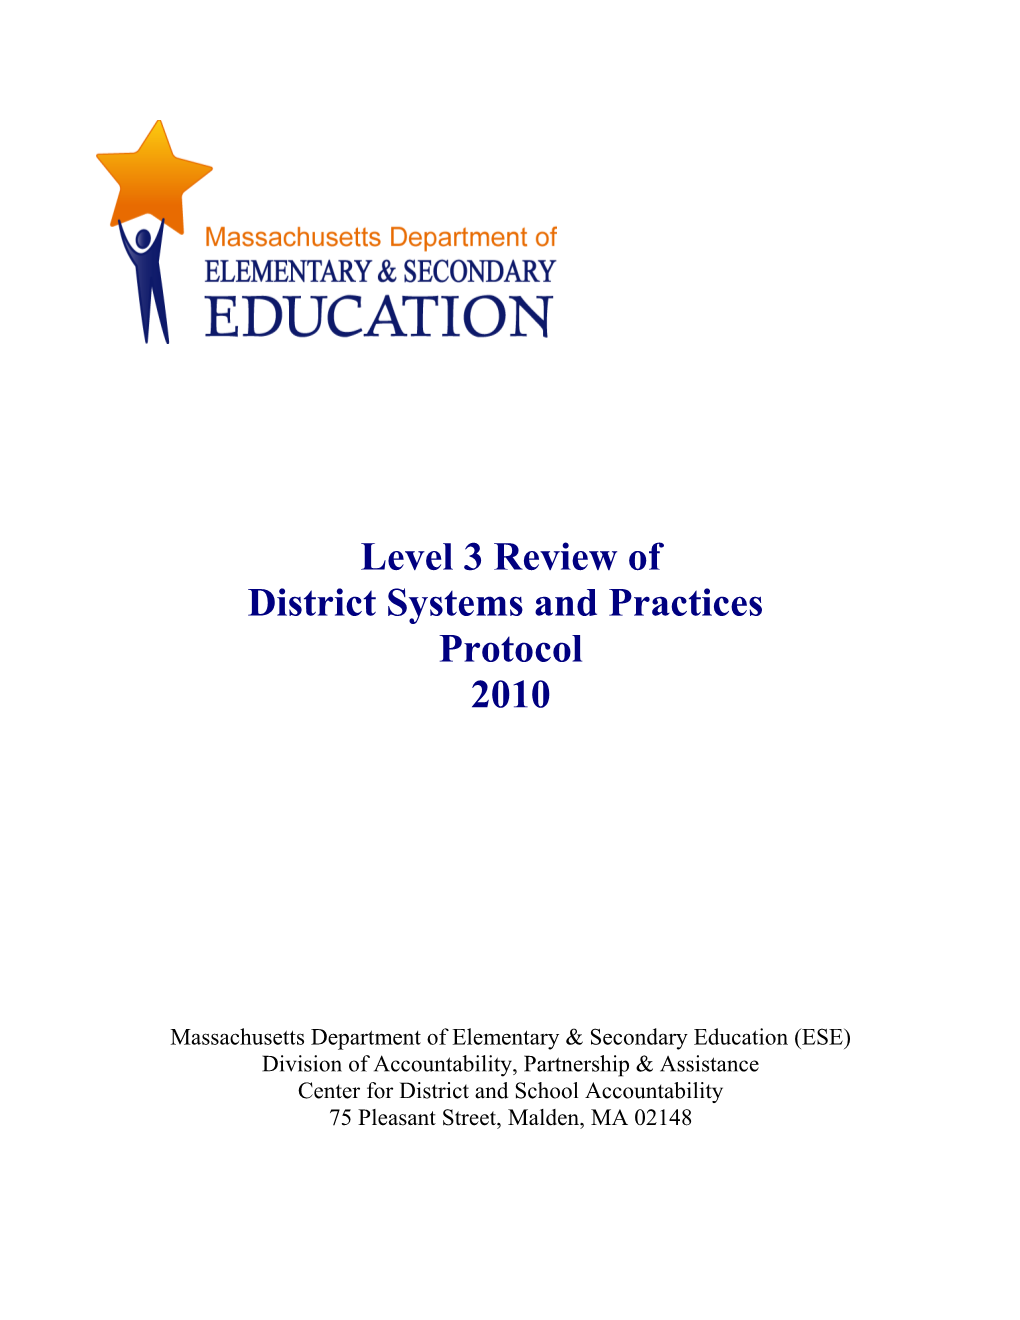 2009-10 Level 3 Review Protocol